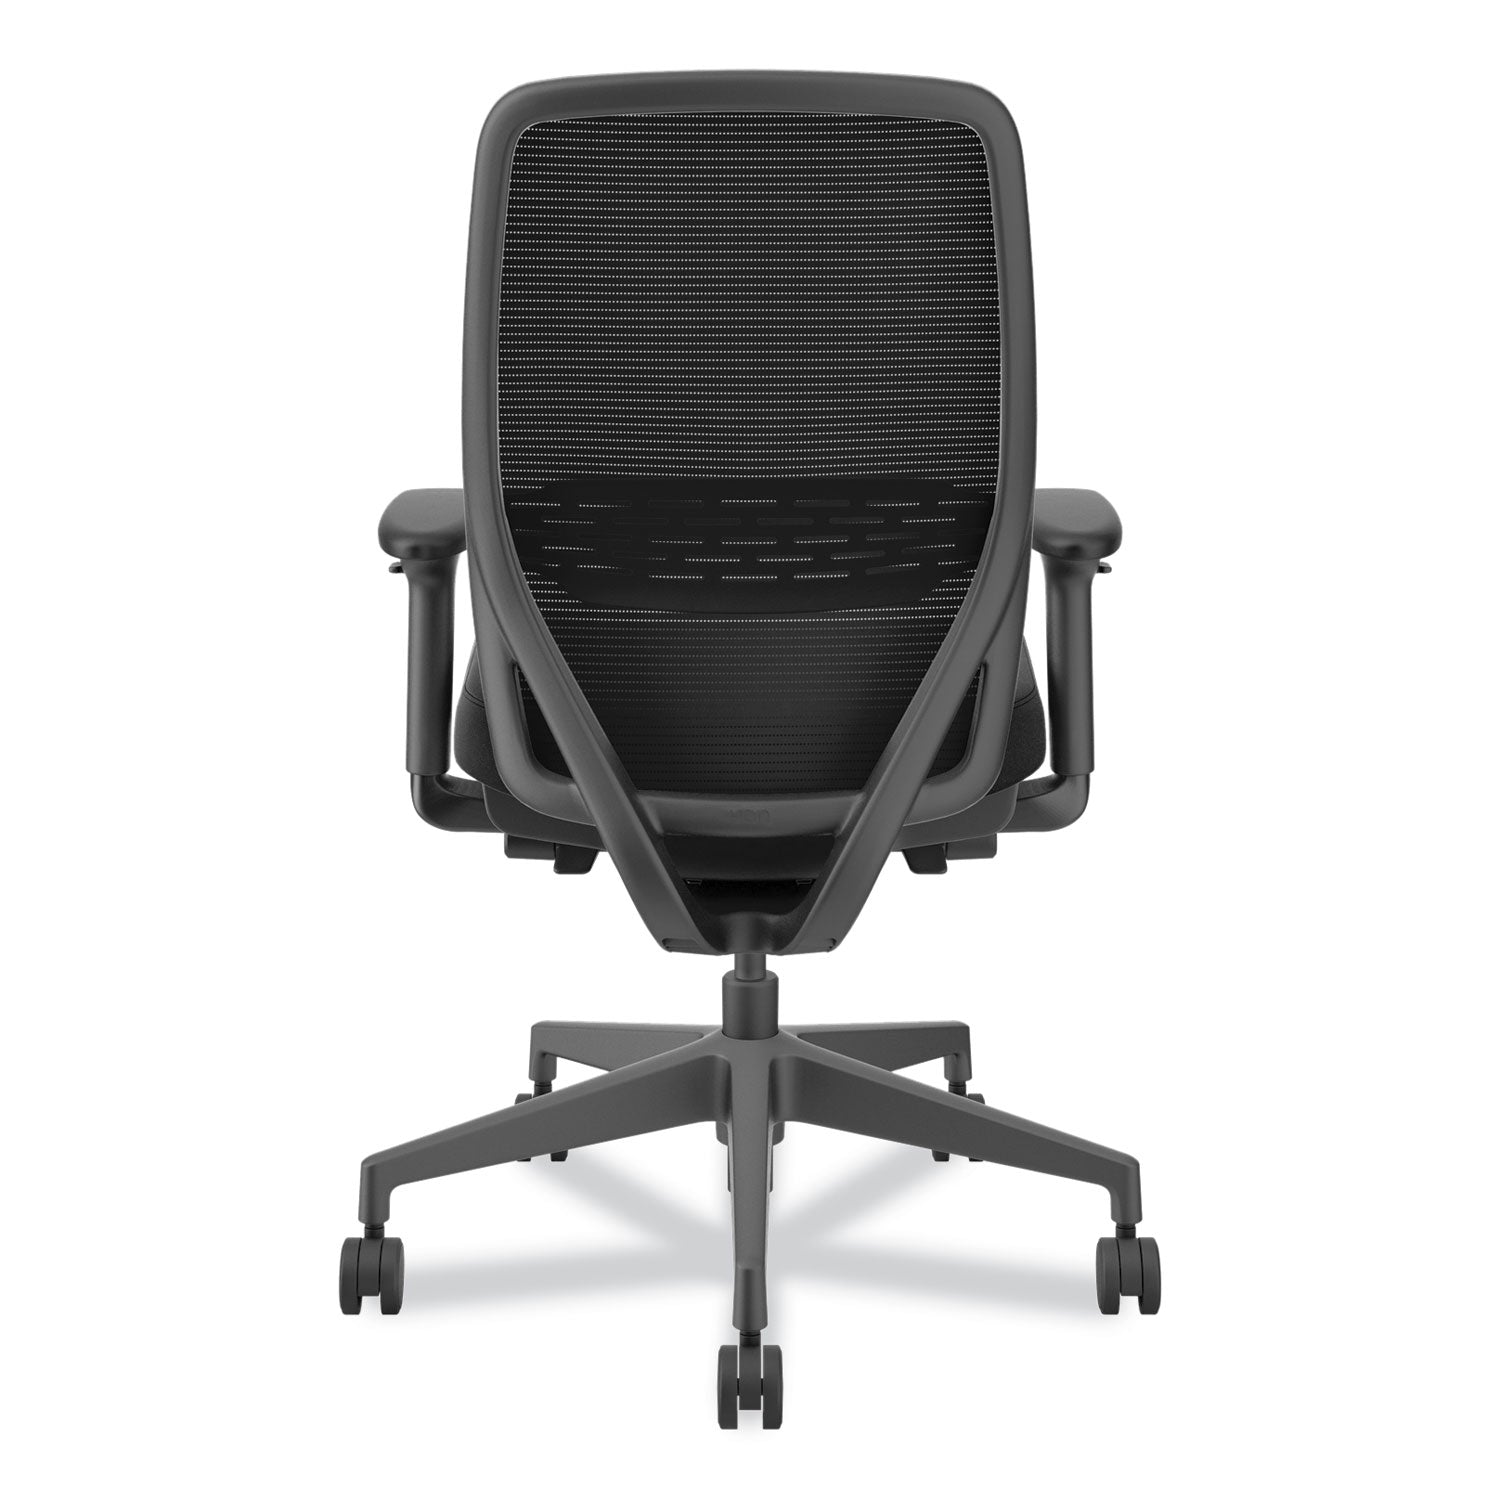 nucleus-series-recharge-task-chair-supports-up-to-300-lb-1663-to-2113-seat-height-black-seat-back-black-base_honnr12samc10bt - 5